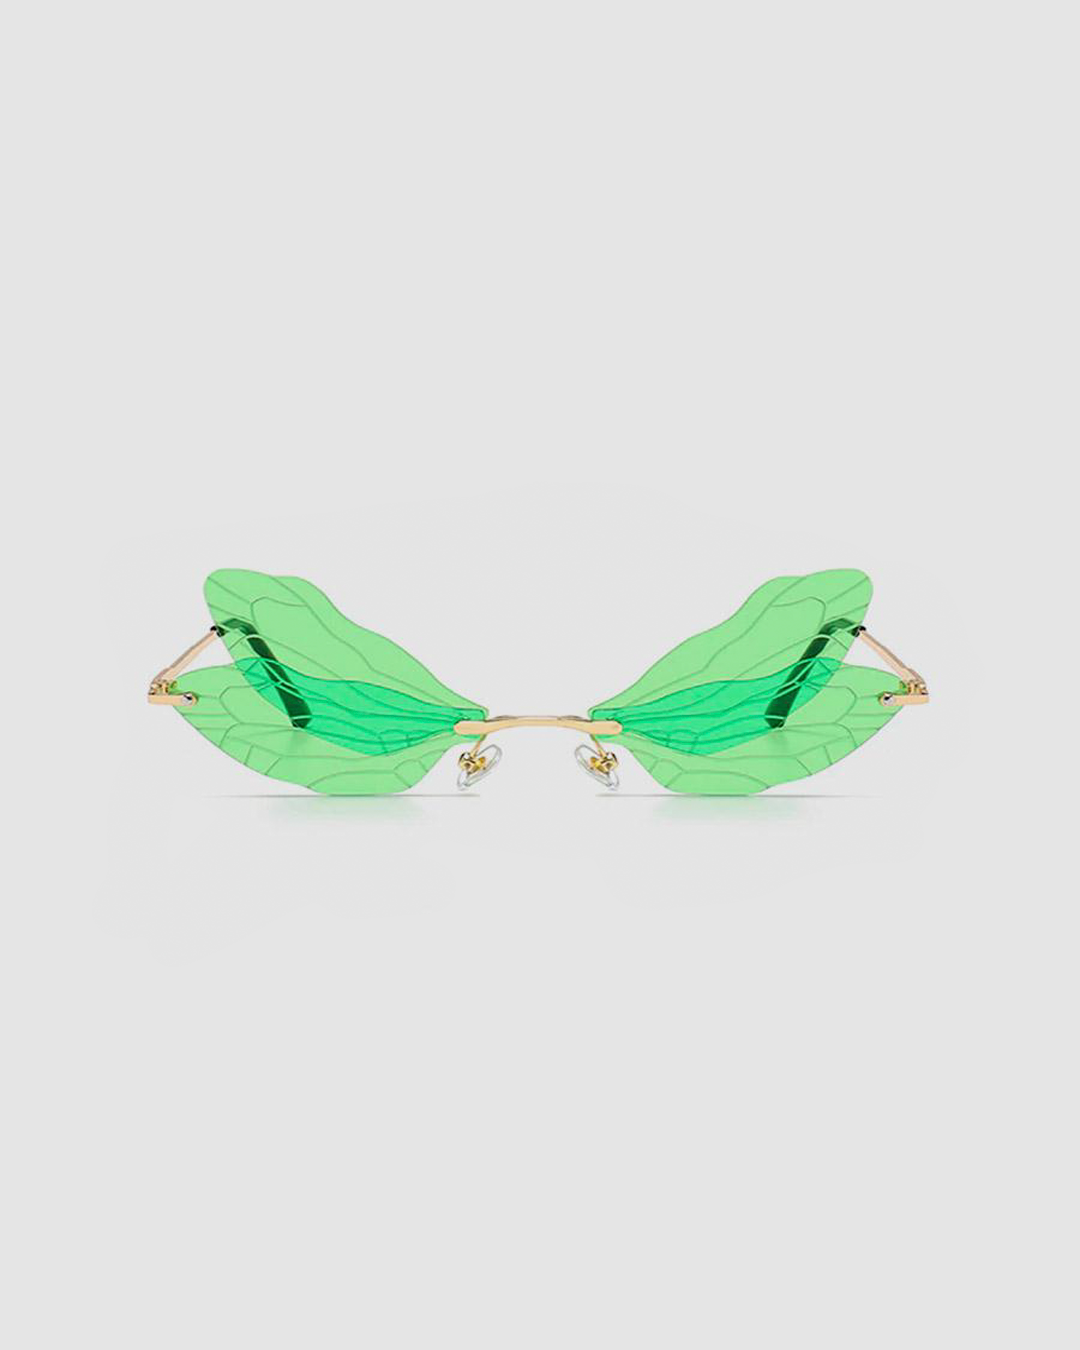 ⁣⁣Dragonfly Sunglasses